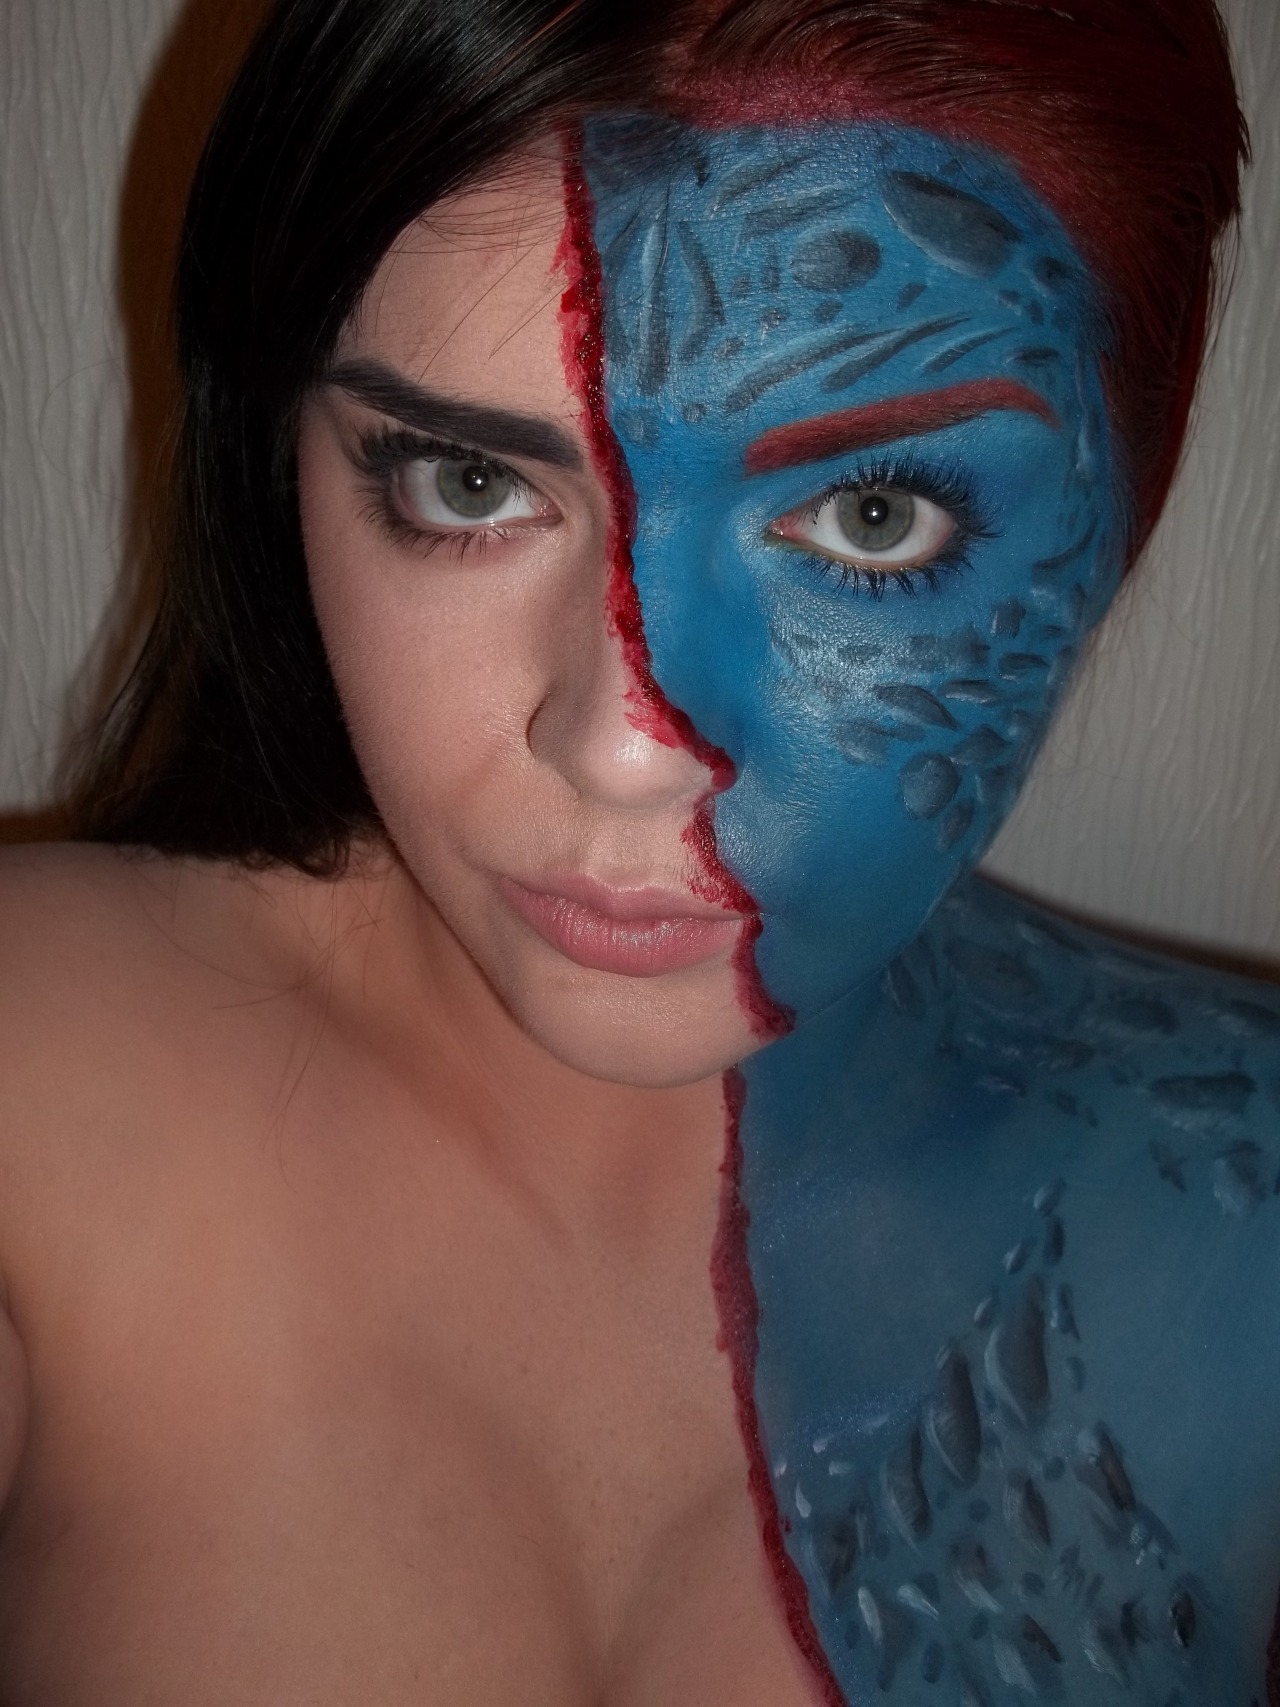 miss-ella-page:  Turned my self into mystique for the night! my favourite X-men!